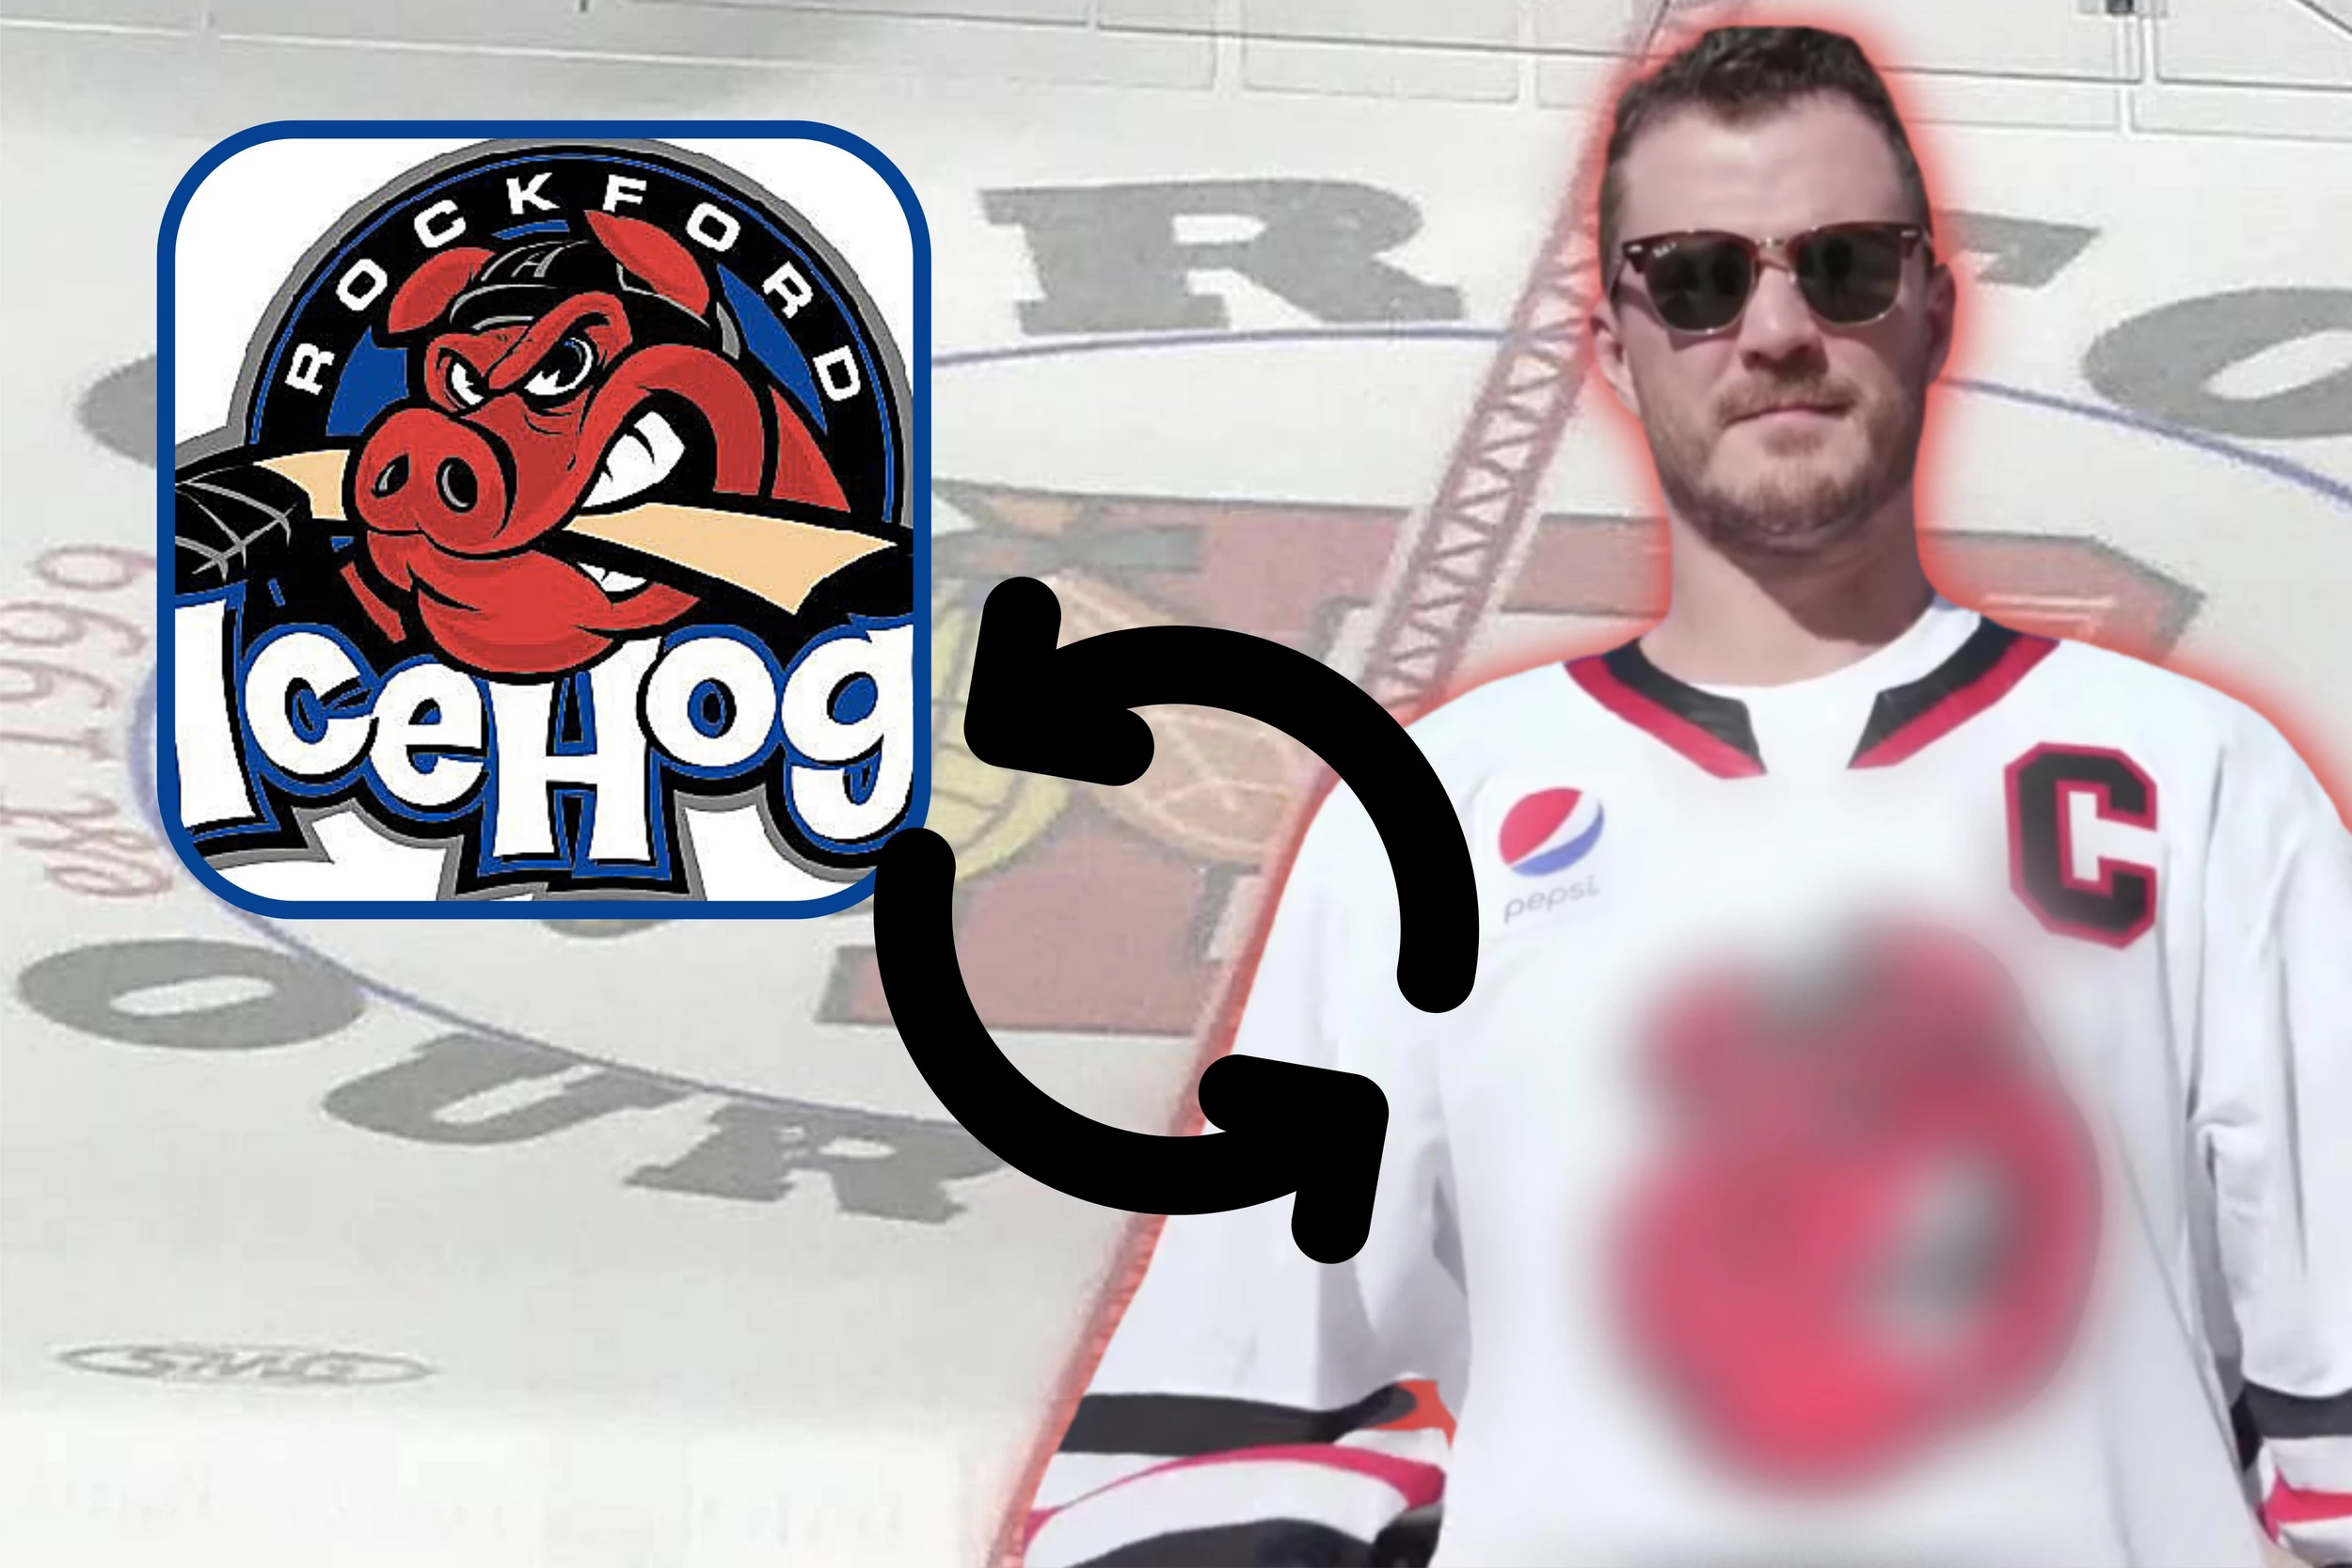 Rockford IceHogs roll with new-look Hammy, although the mascot may 'evolve